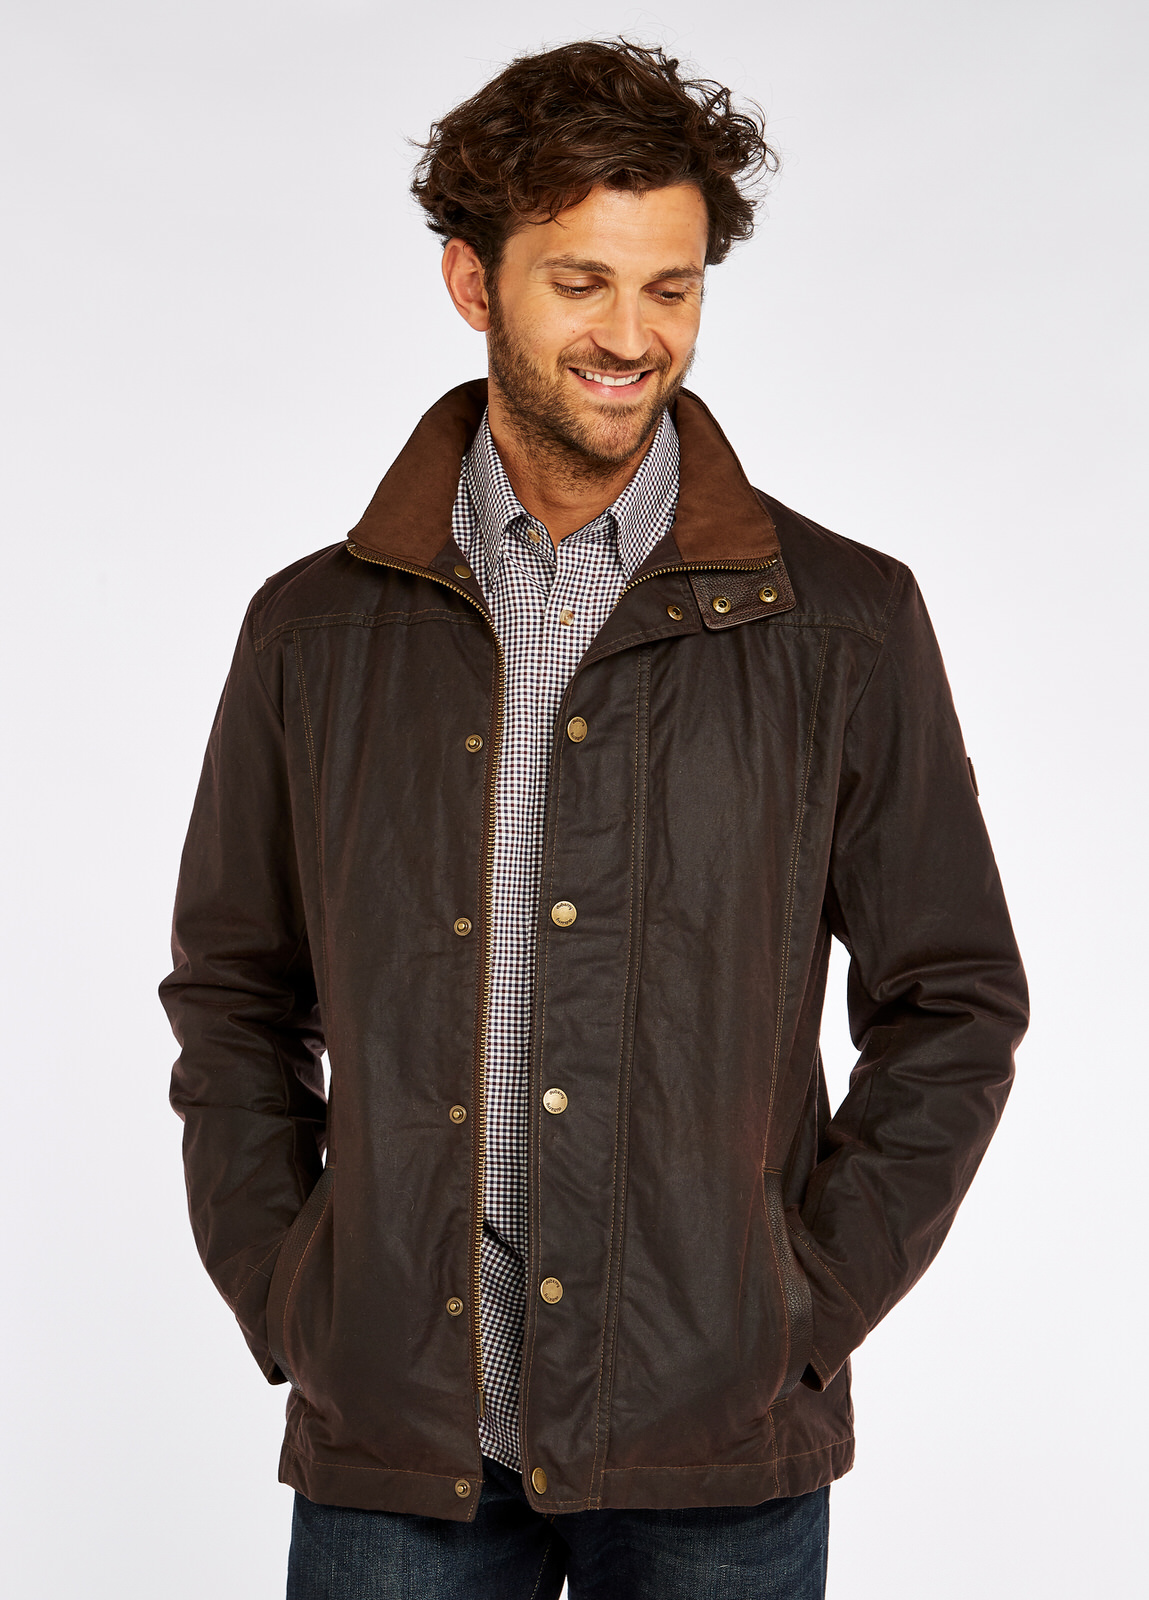 Waist up view of a male model wearing a java brown coloured Dubarry Carrickfergus waxed jacket, open with the lighter brown inside collar visible. The model is also wearing a white and black checkered shirt